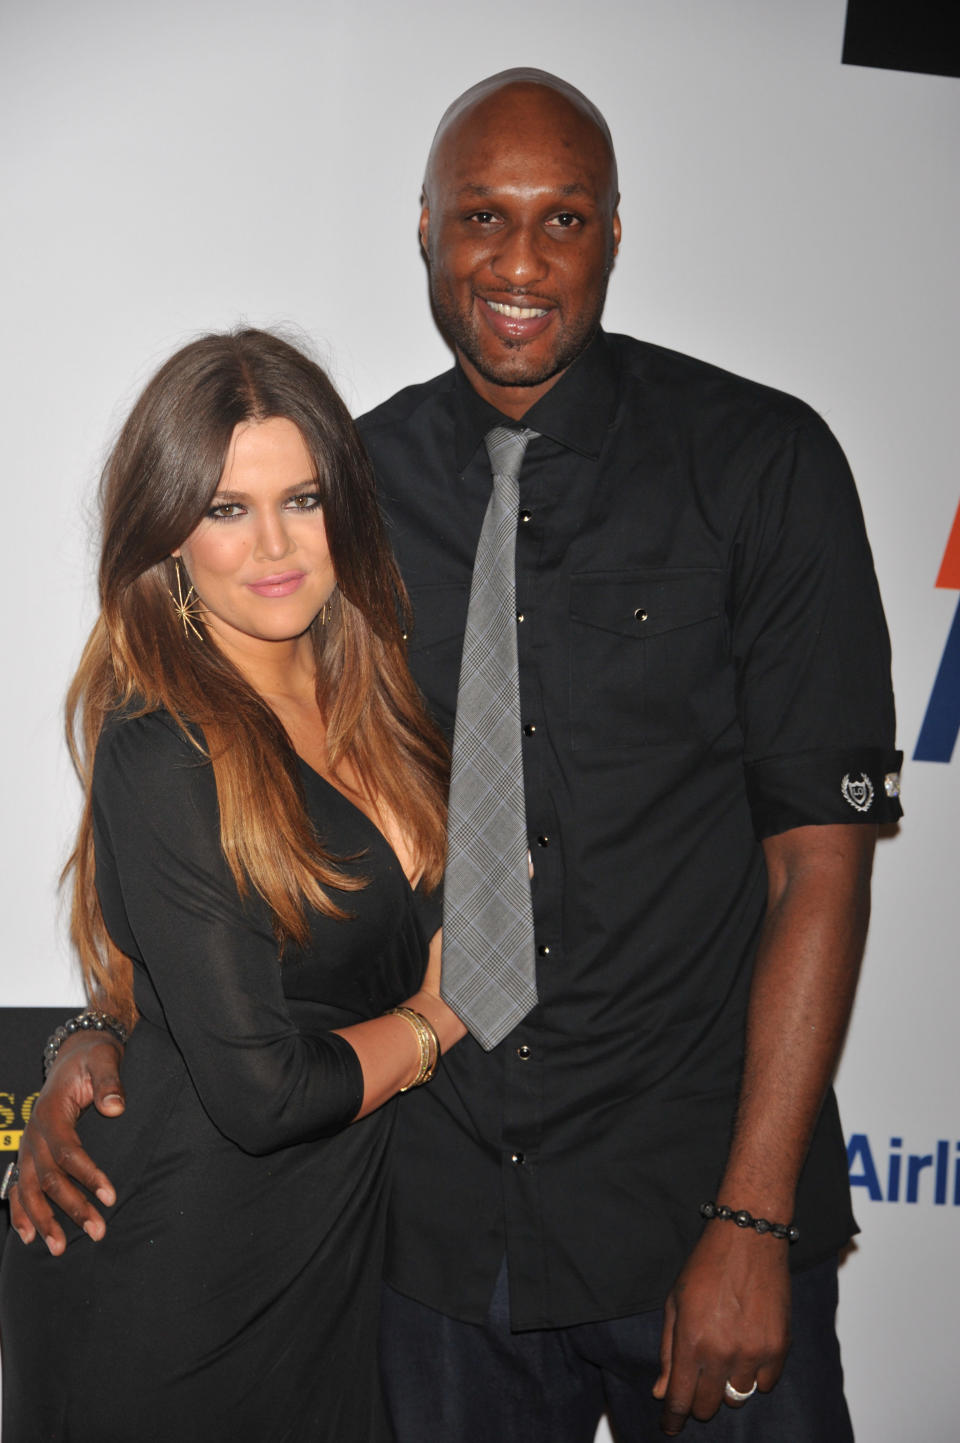 Not to add fuel to the recent fire, buutttt these two were one of my favorite couples in their heyday. Yes, they had a heyday. Don't fight me on this. The former NBA player and reality star were married in 2009 before splitting in 2013 and finalizing their divorce in 2016.